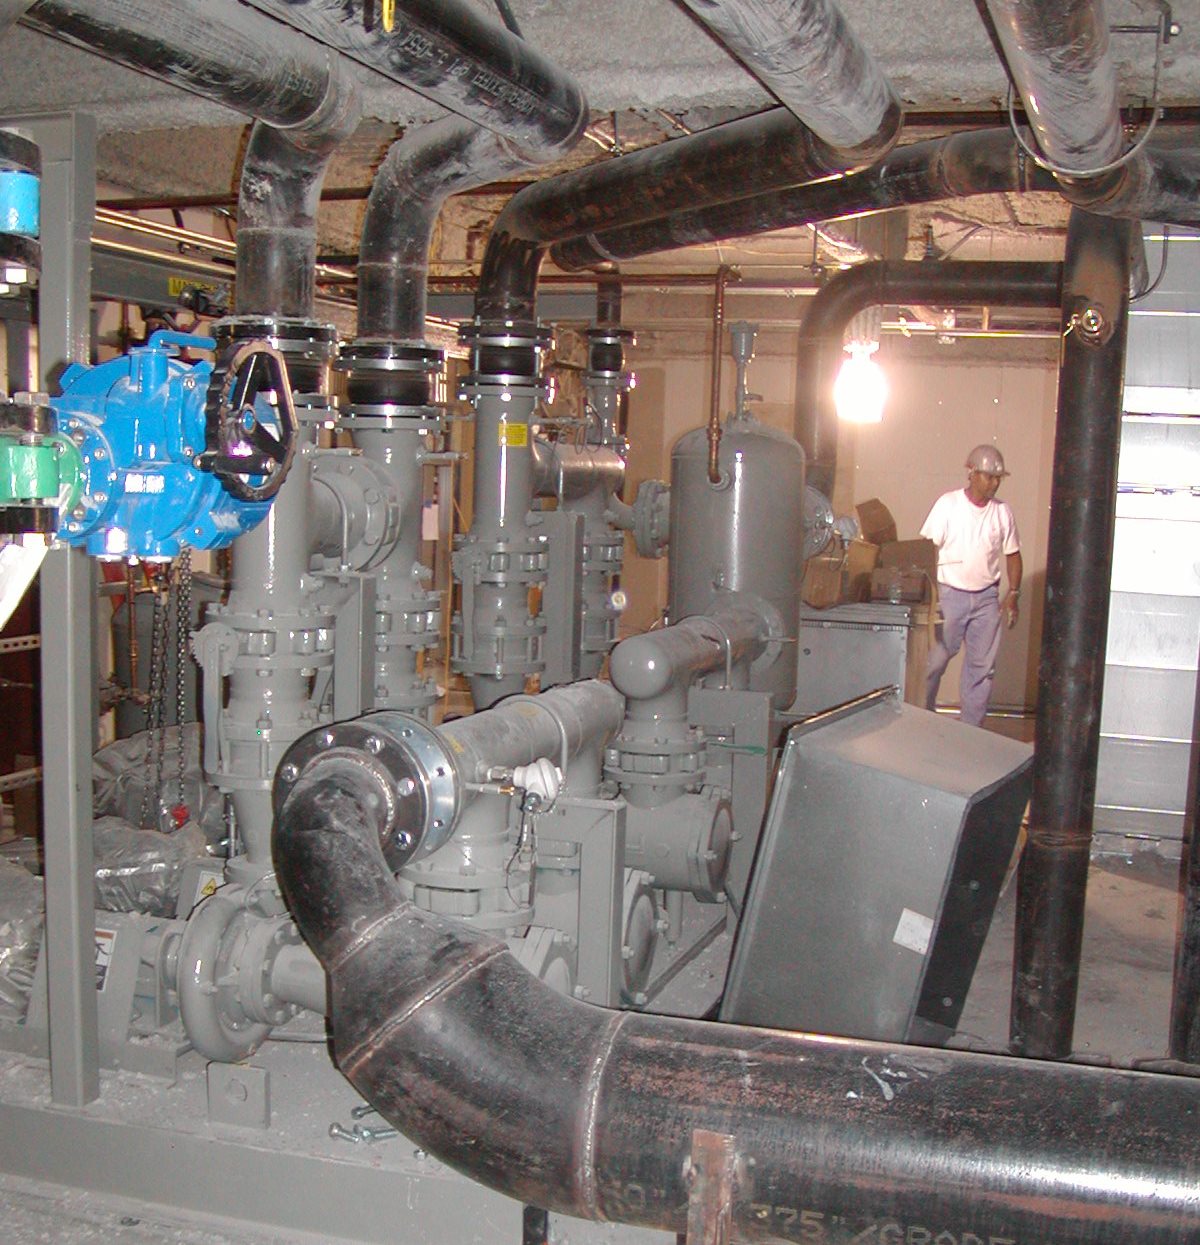 Penthouse Mechanical Room at Triad Centre